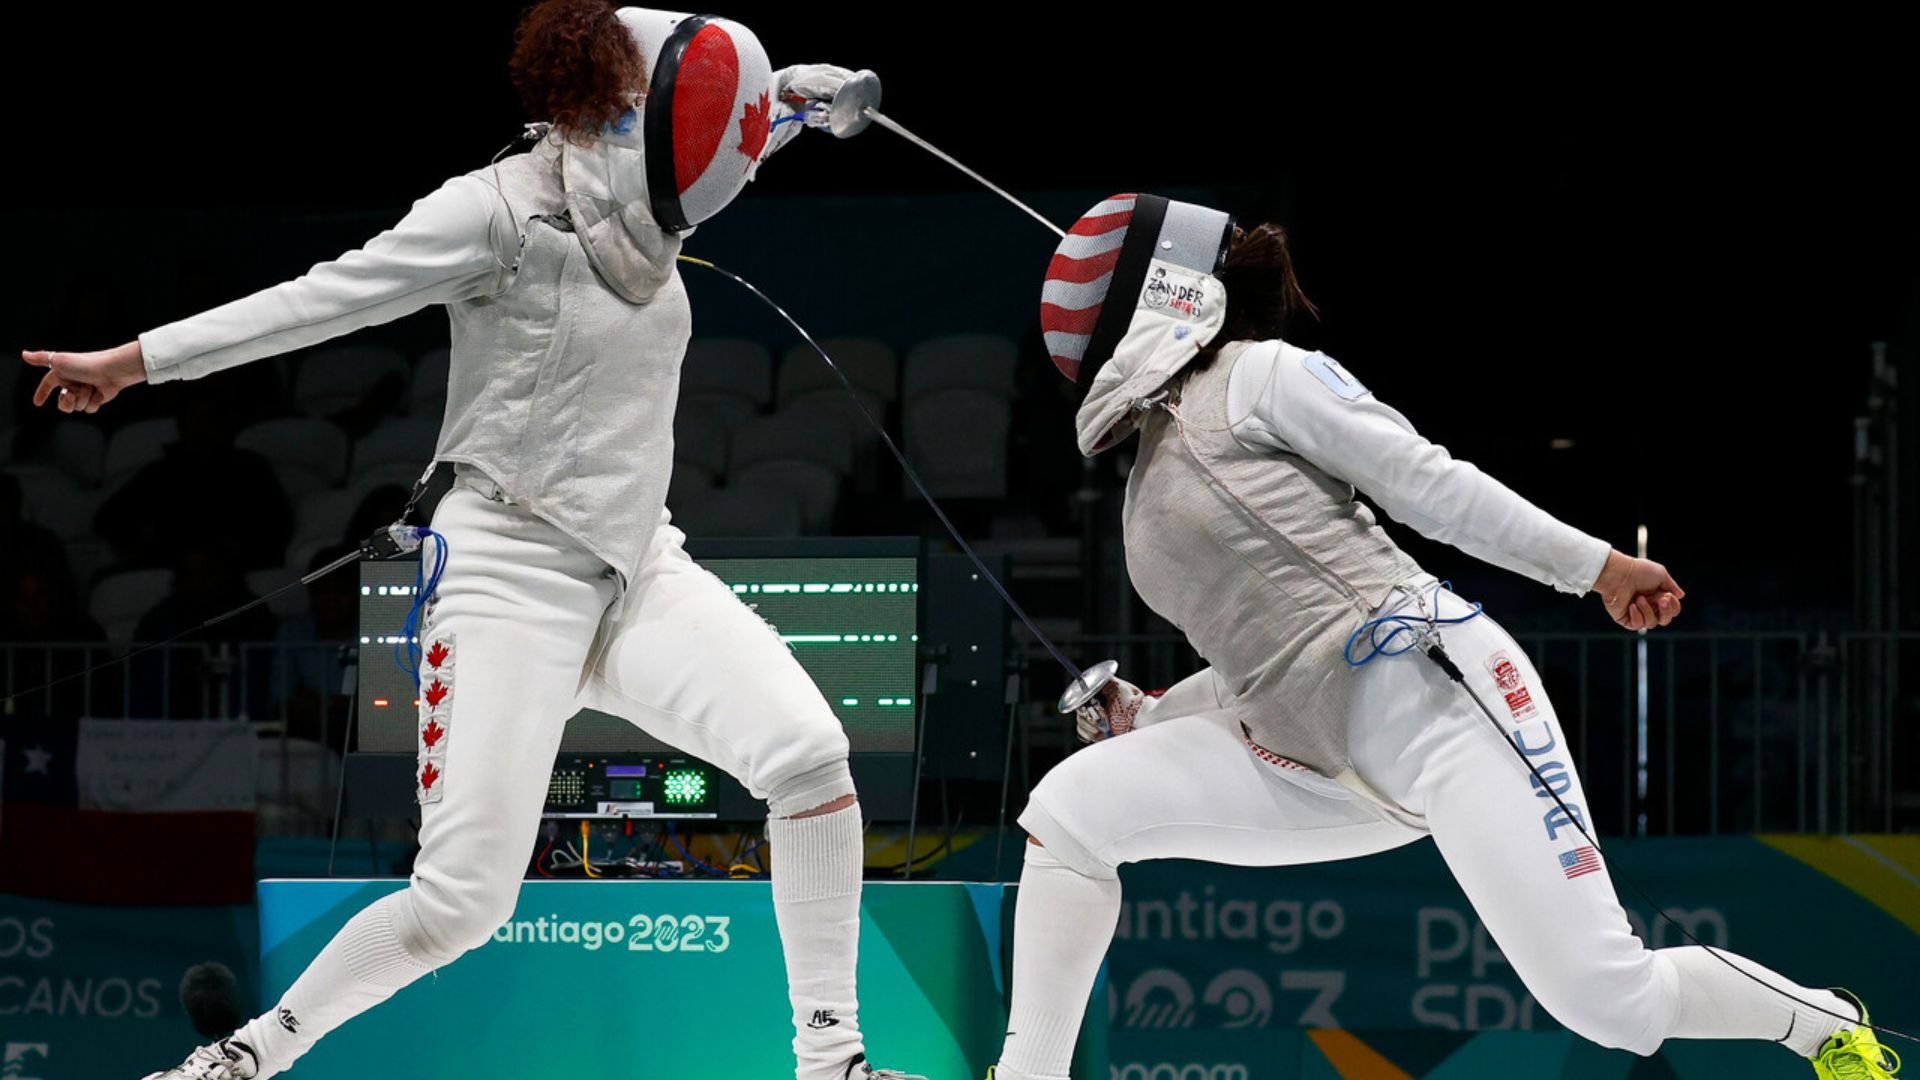 The US dominates fencing, continues to add gold medals at Santiago 2023